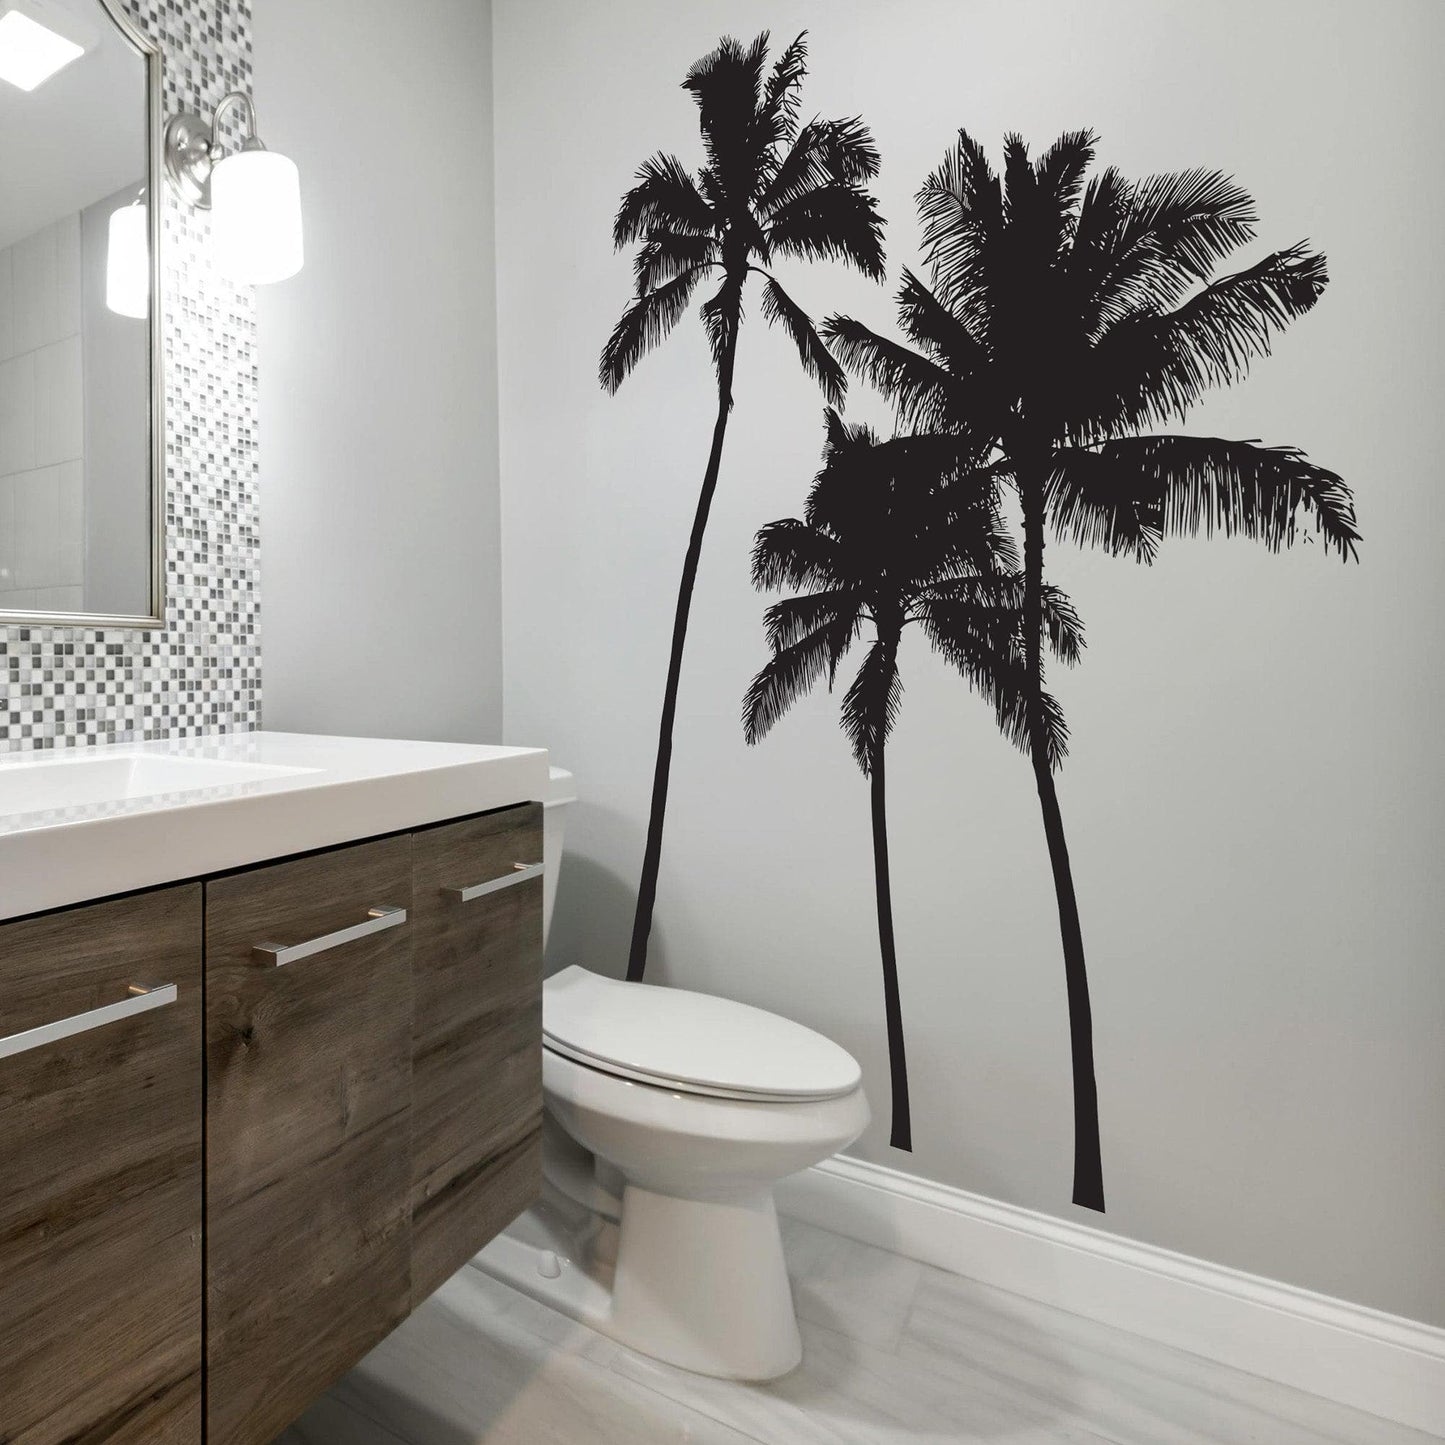 Tropical Palm Trees Vinyl Wall Decal Sticker. #801